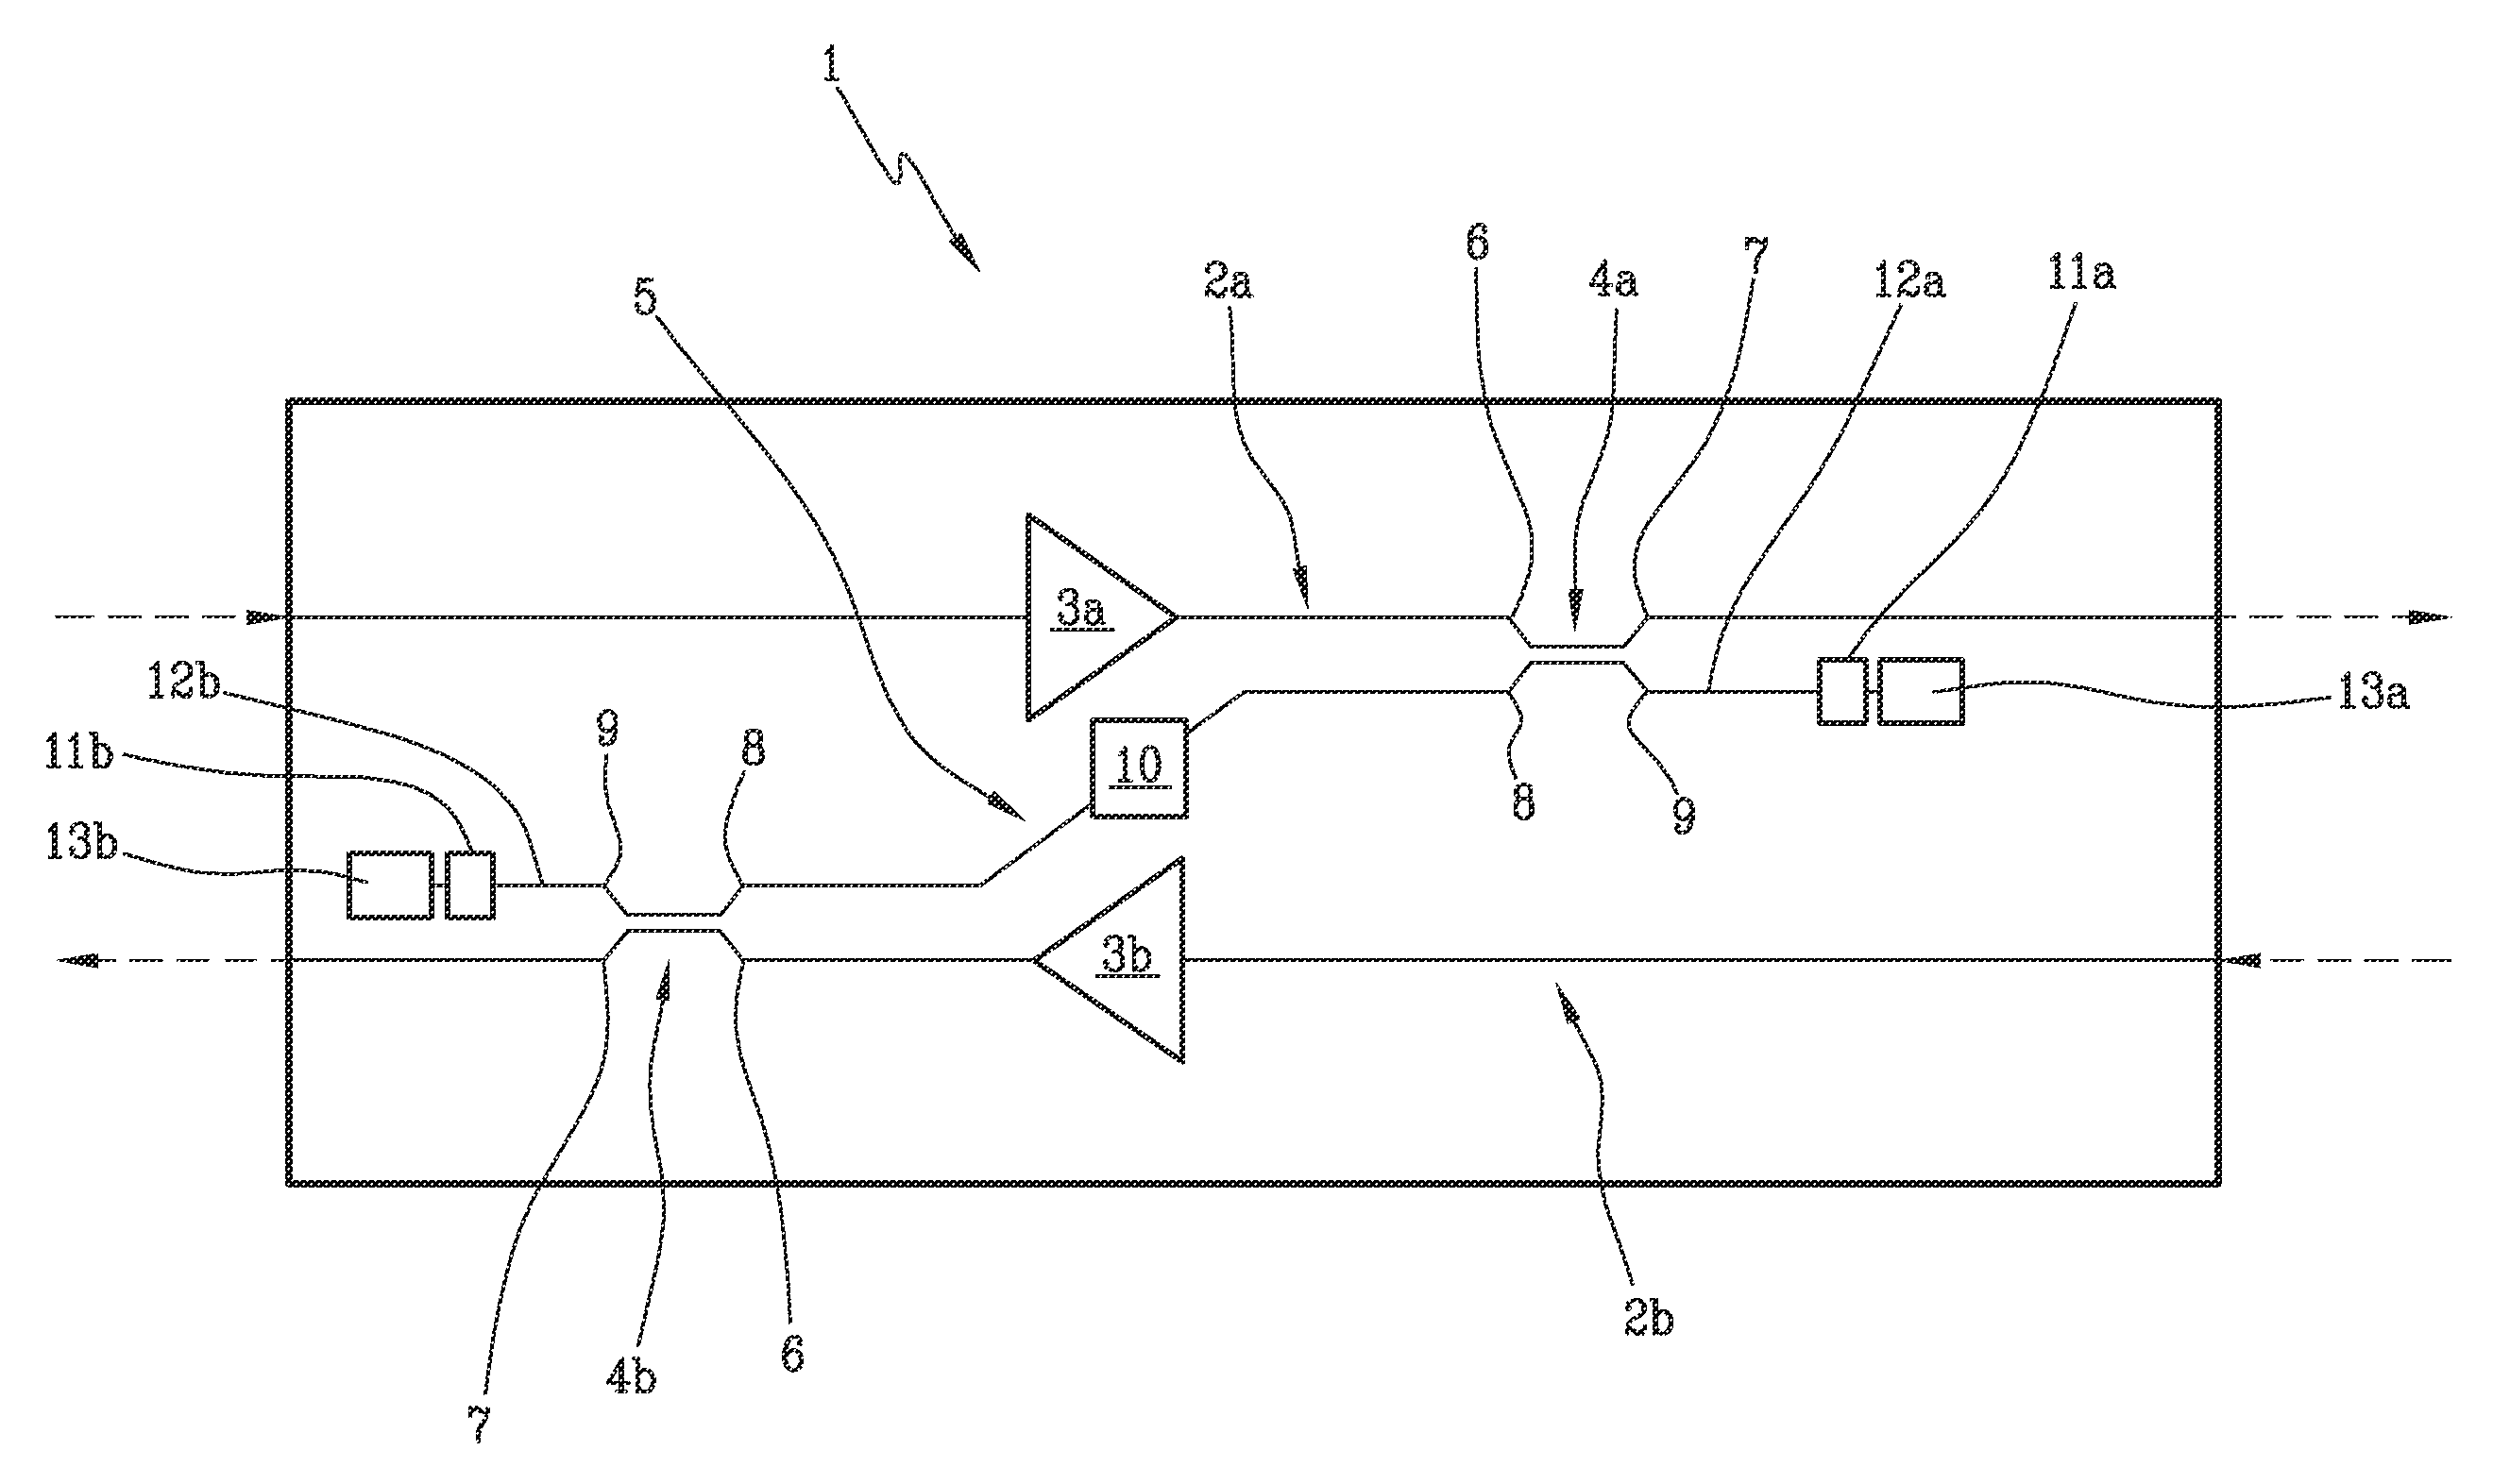 Optical amplification stage for OTDR monitoring and related method and system for OTDR monitoring of an optical communication link